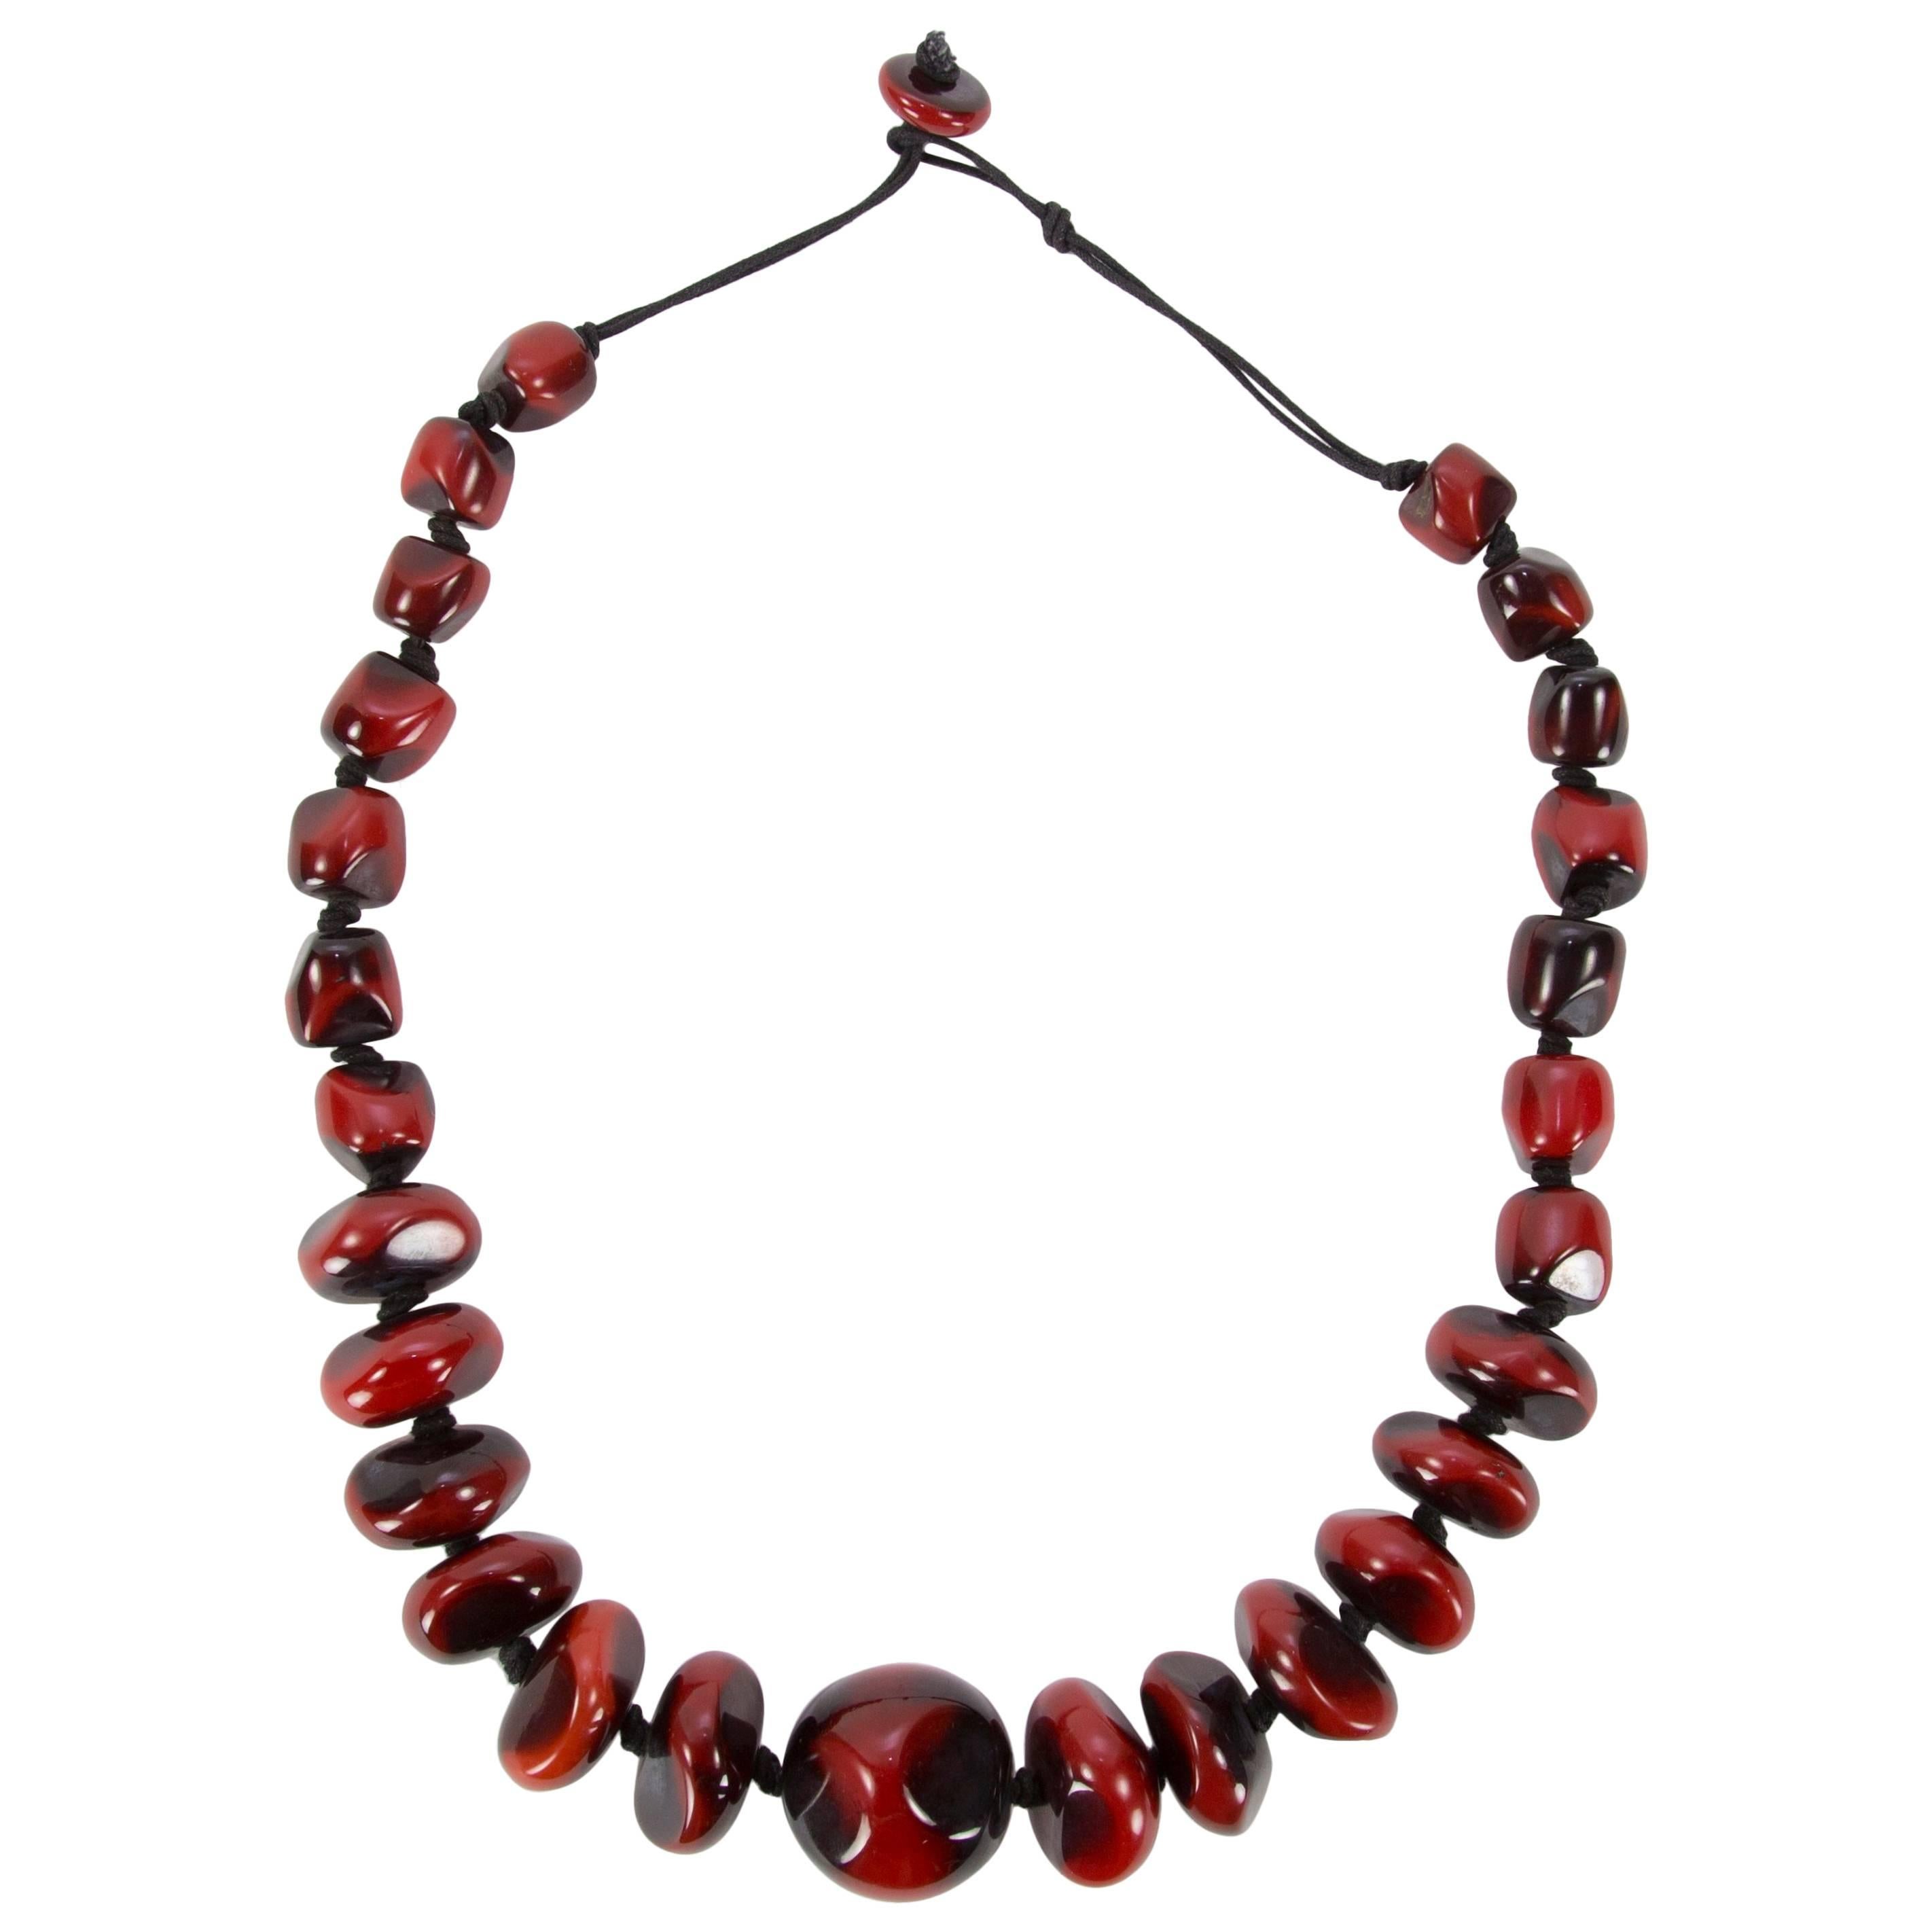 Chunky Lustrous Faux Coral Resin Beads Statement Necklace 